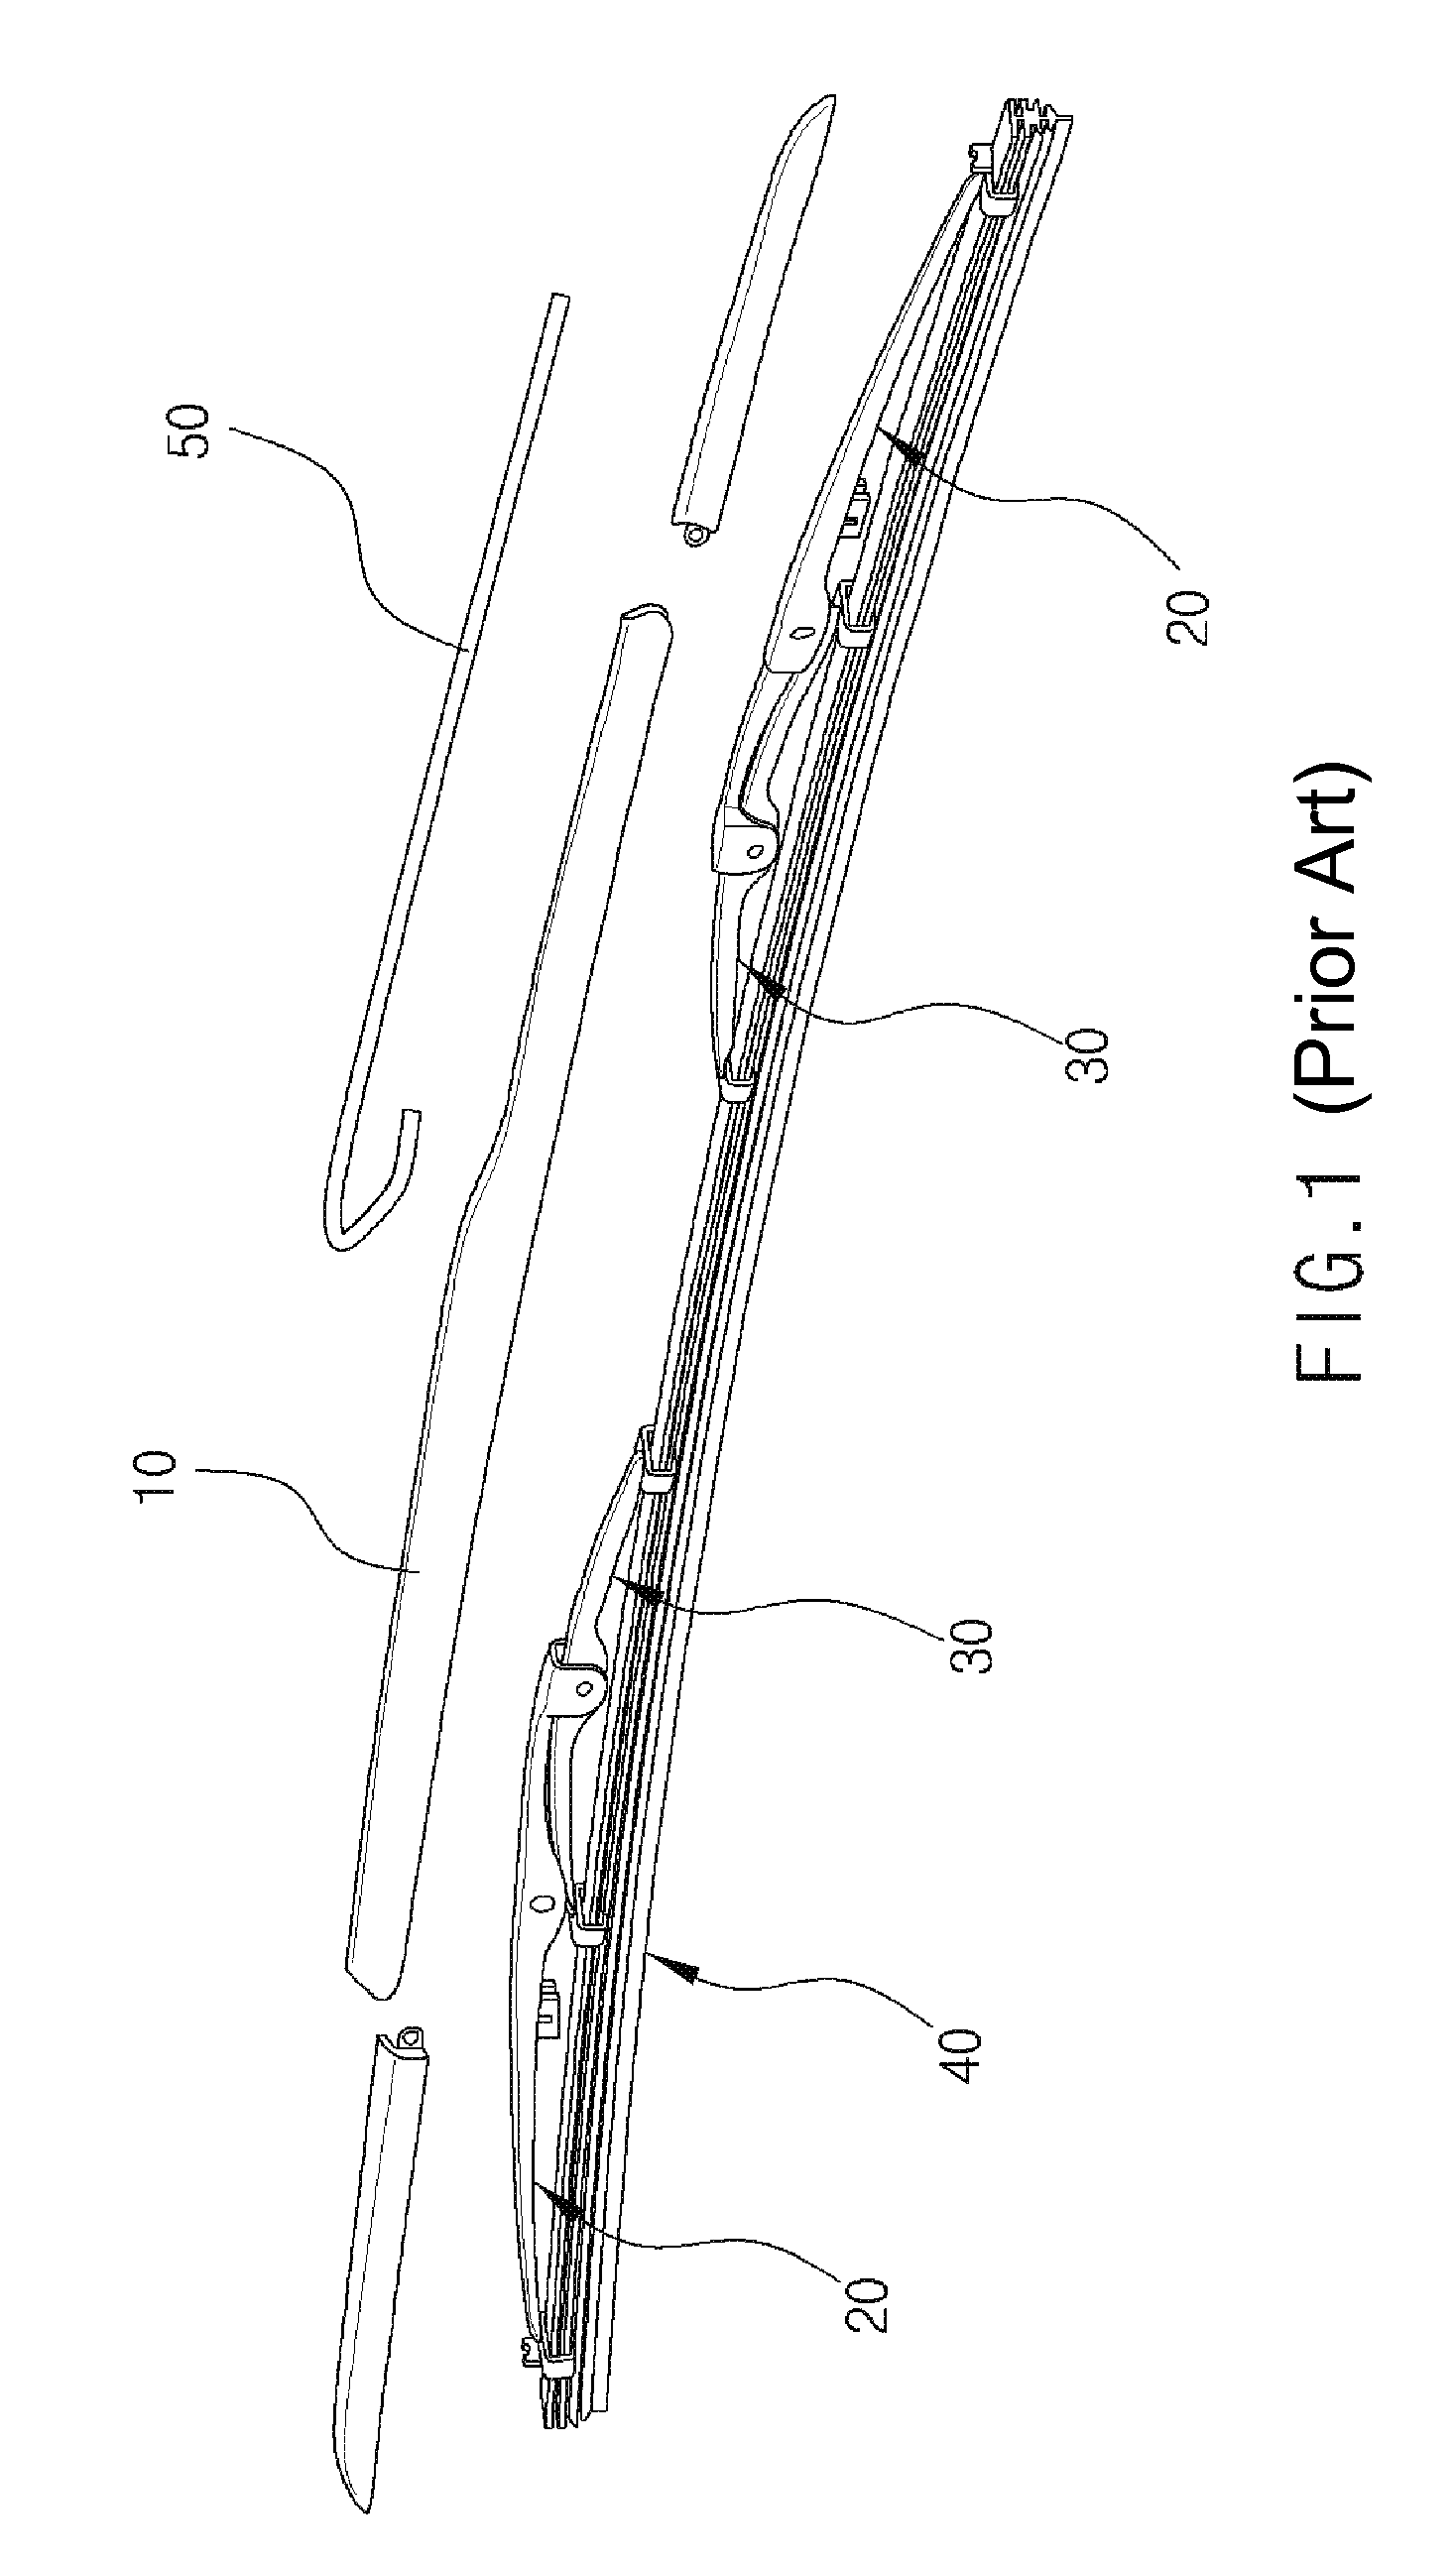 Wiper blade for vehicle